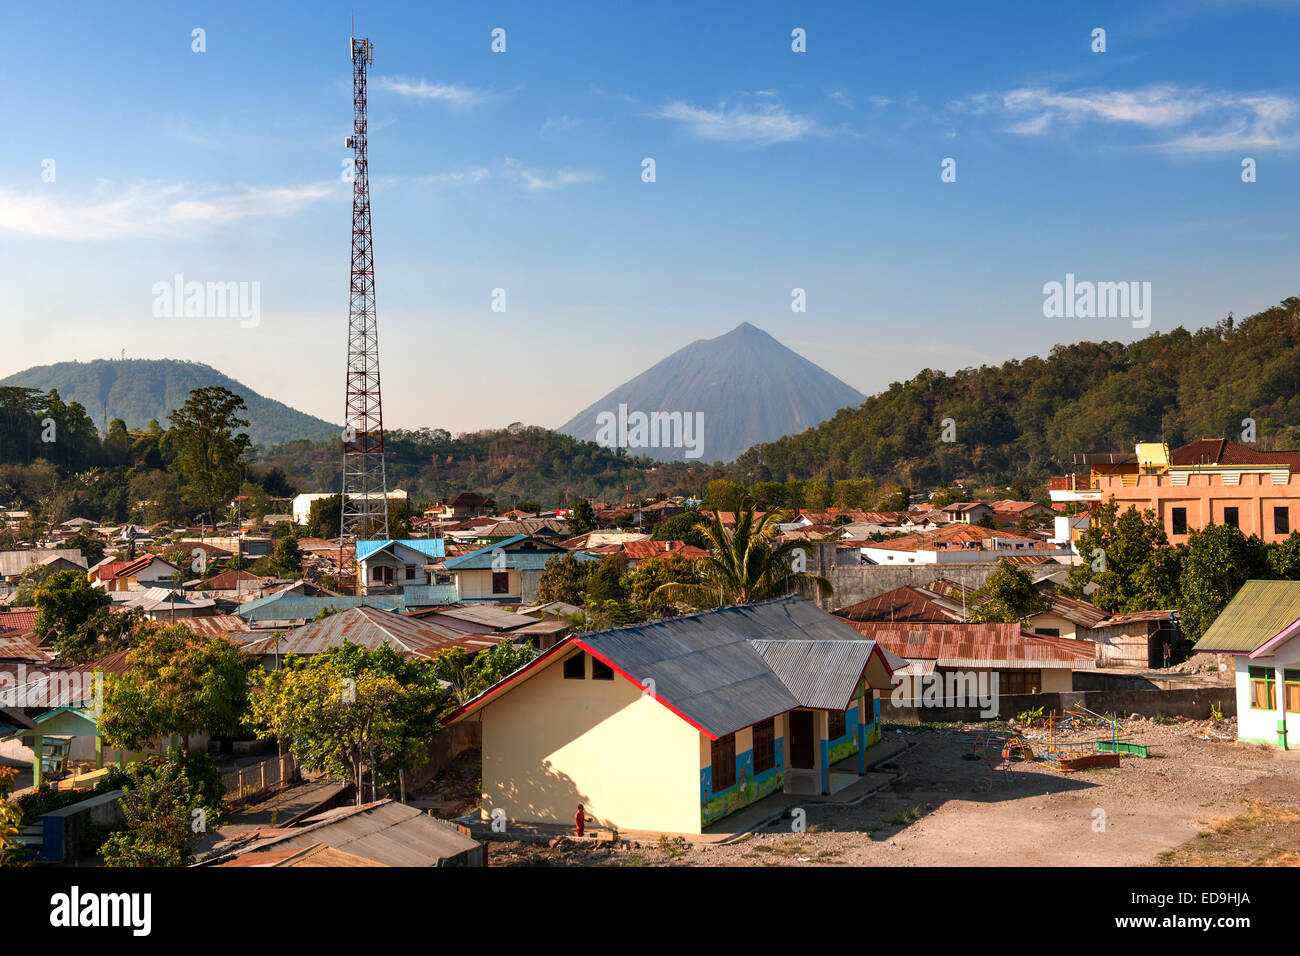 The town of Bajawa and Mount Inerie volcano on Flores island, East Nusa Tenggara, Indonesia. Stock Photo